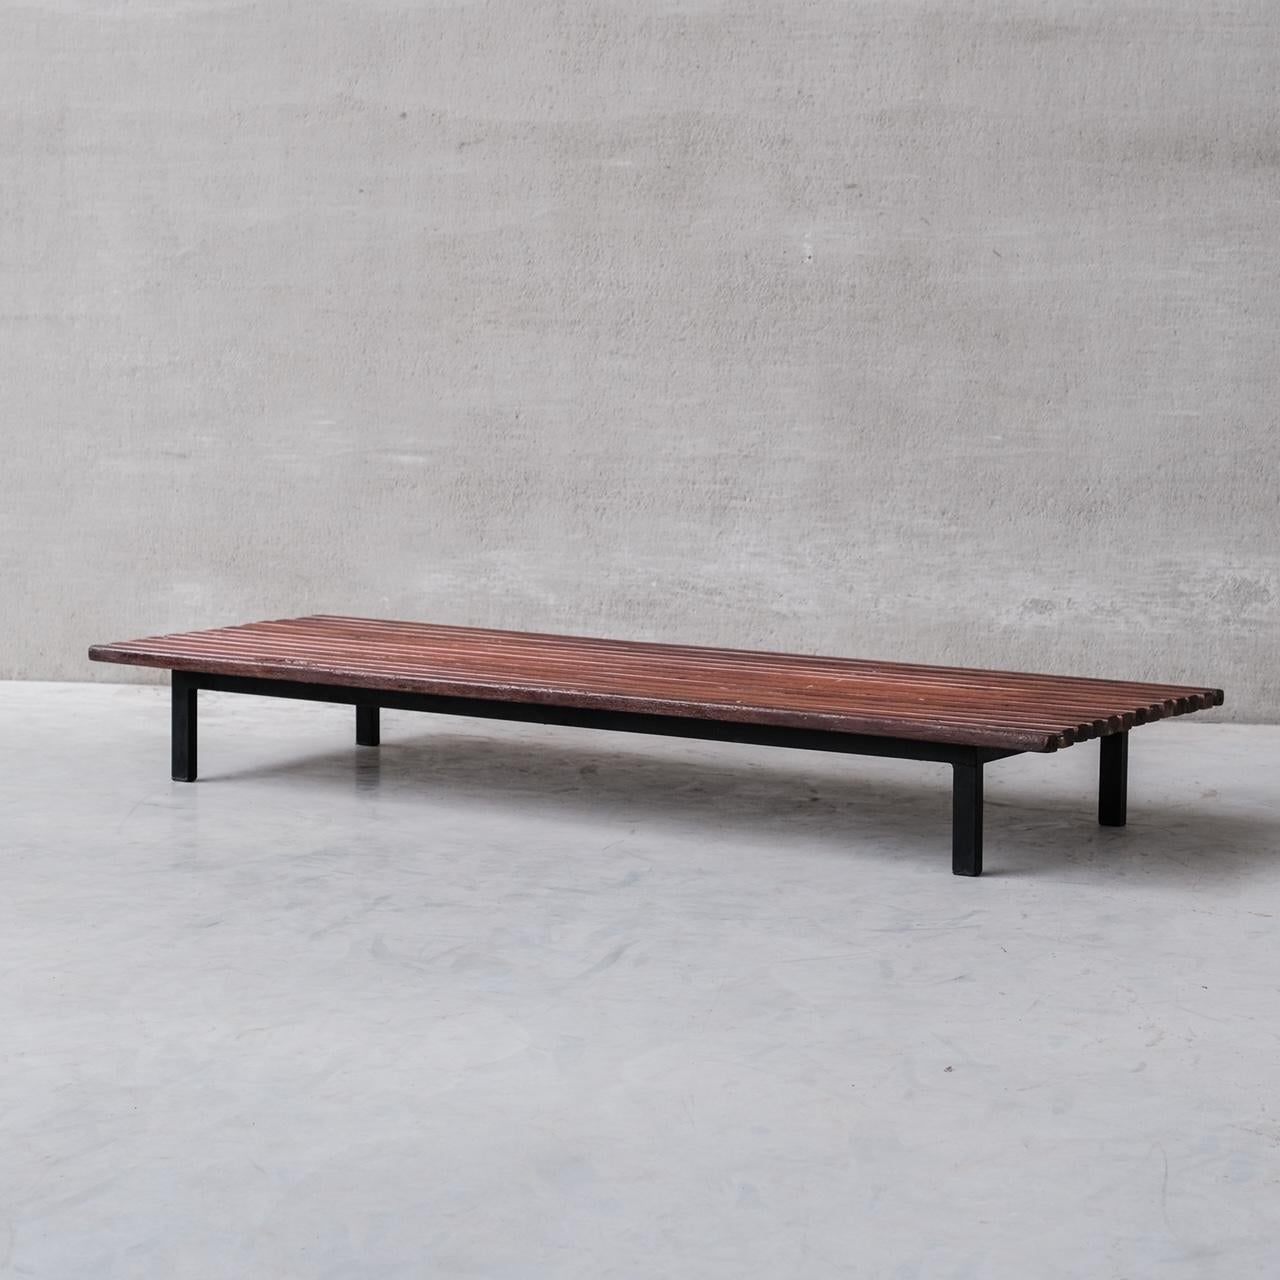 Charlotte Perriand 'Cansado' Bench / Coffee Table for Steph Simon 'No.2' 1